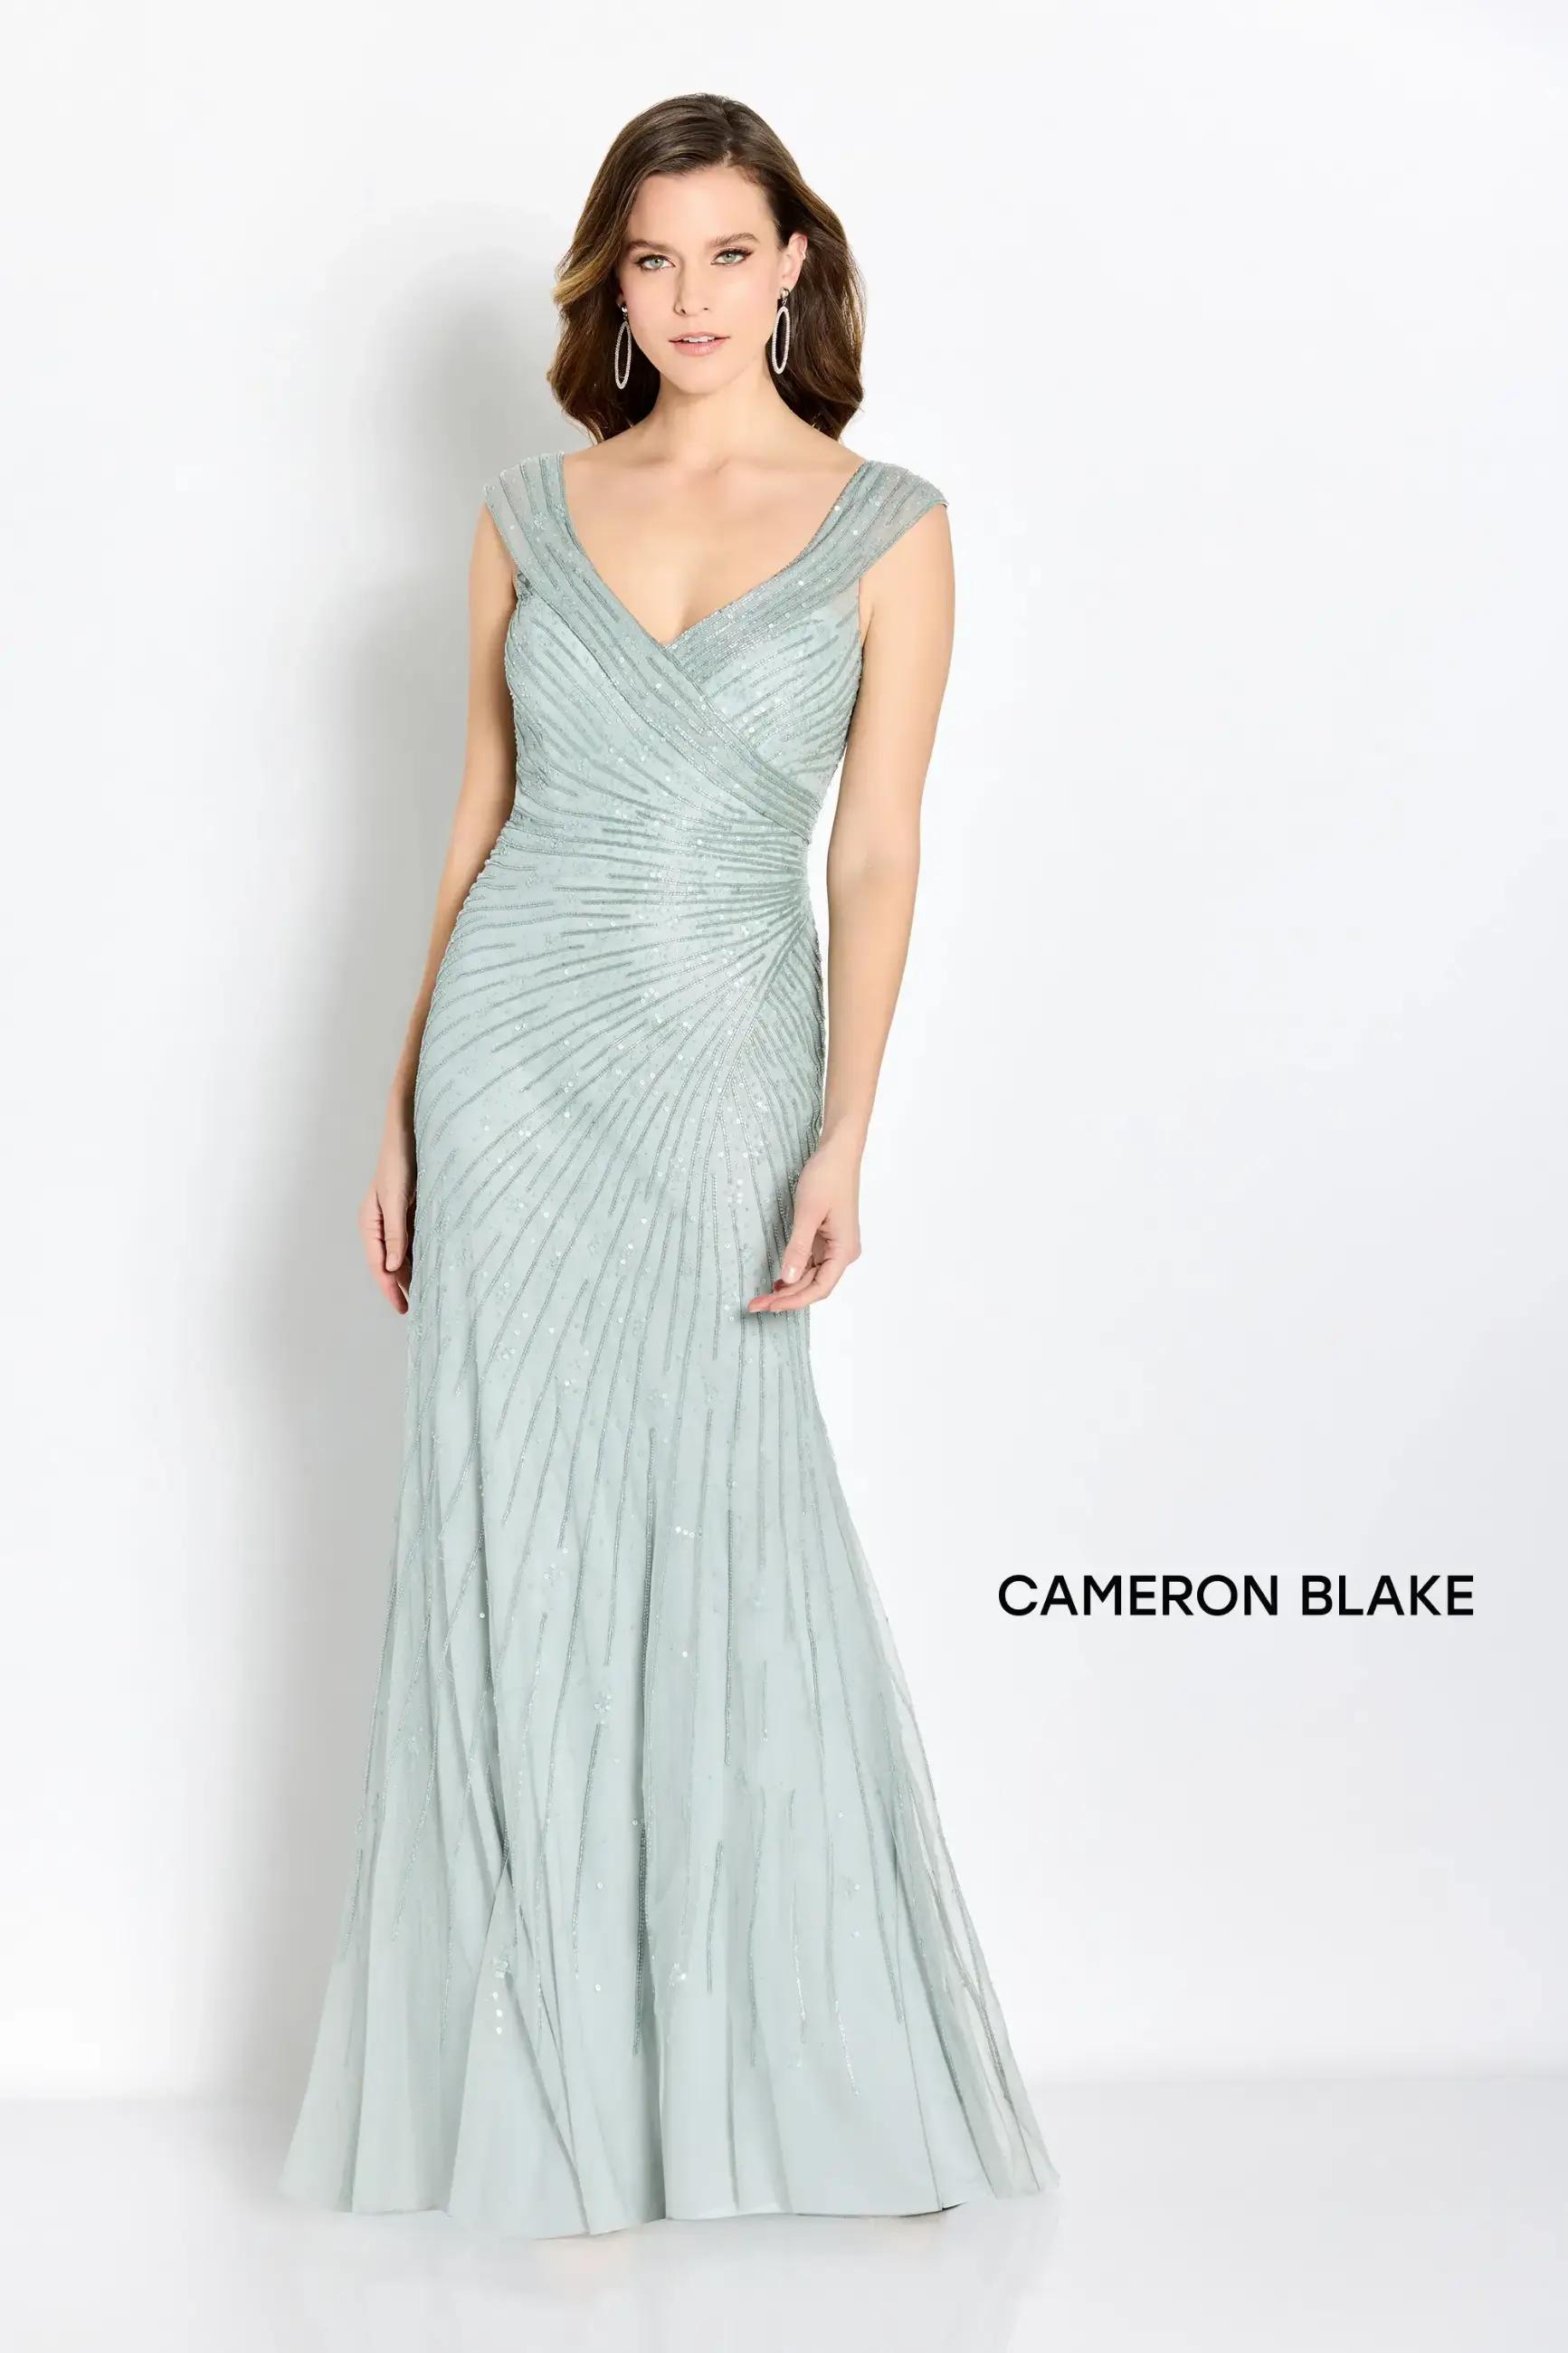 Exploring Trending Hues for Mother of the Bride Dresses Image